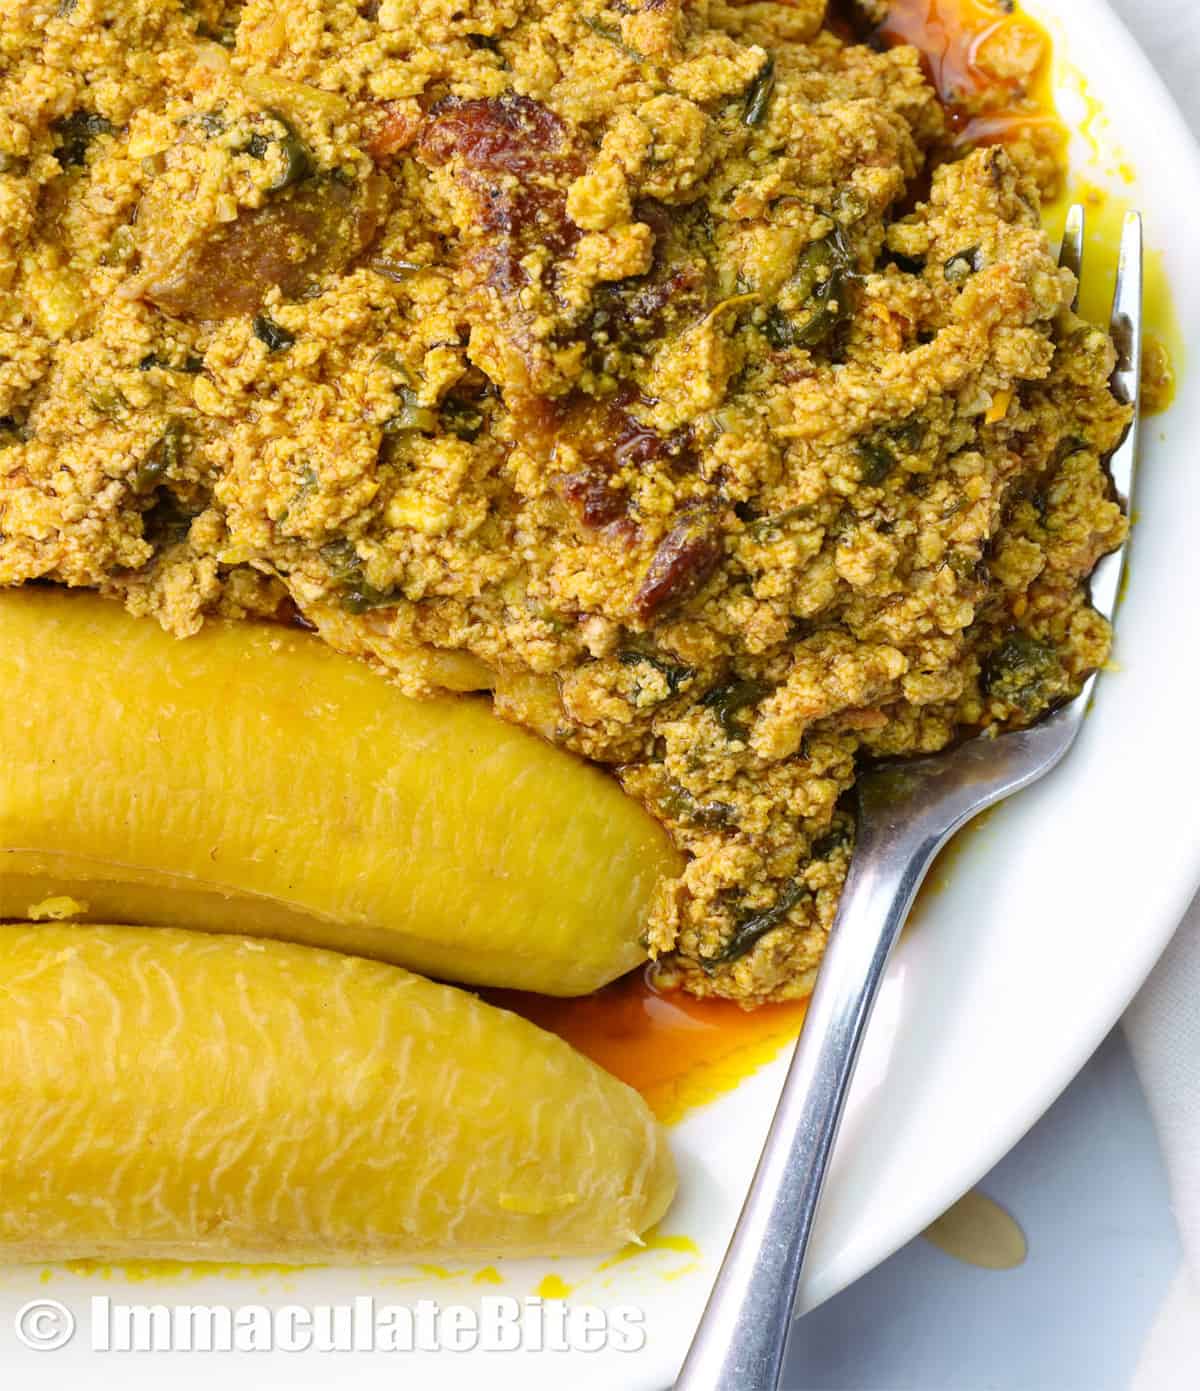 a plate of egusi soup served with two plantains